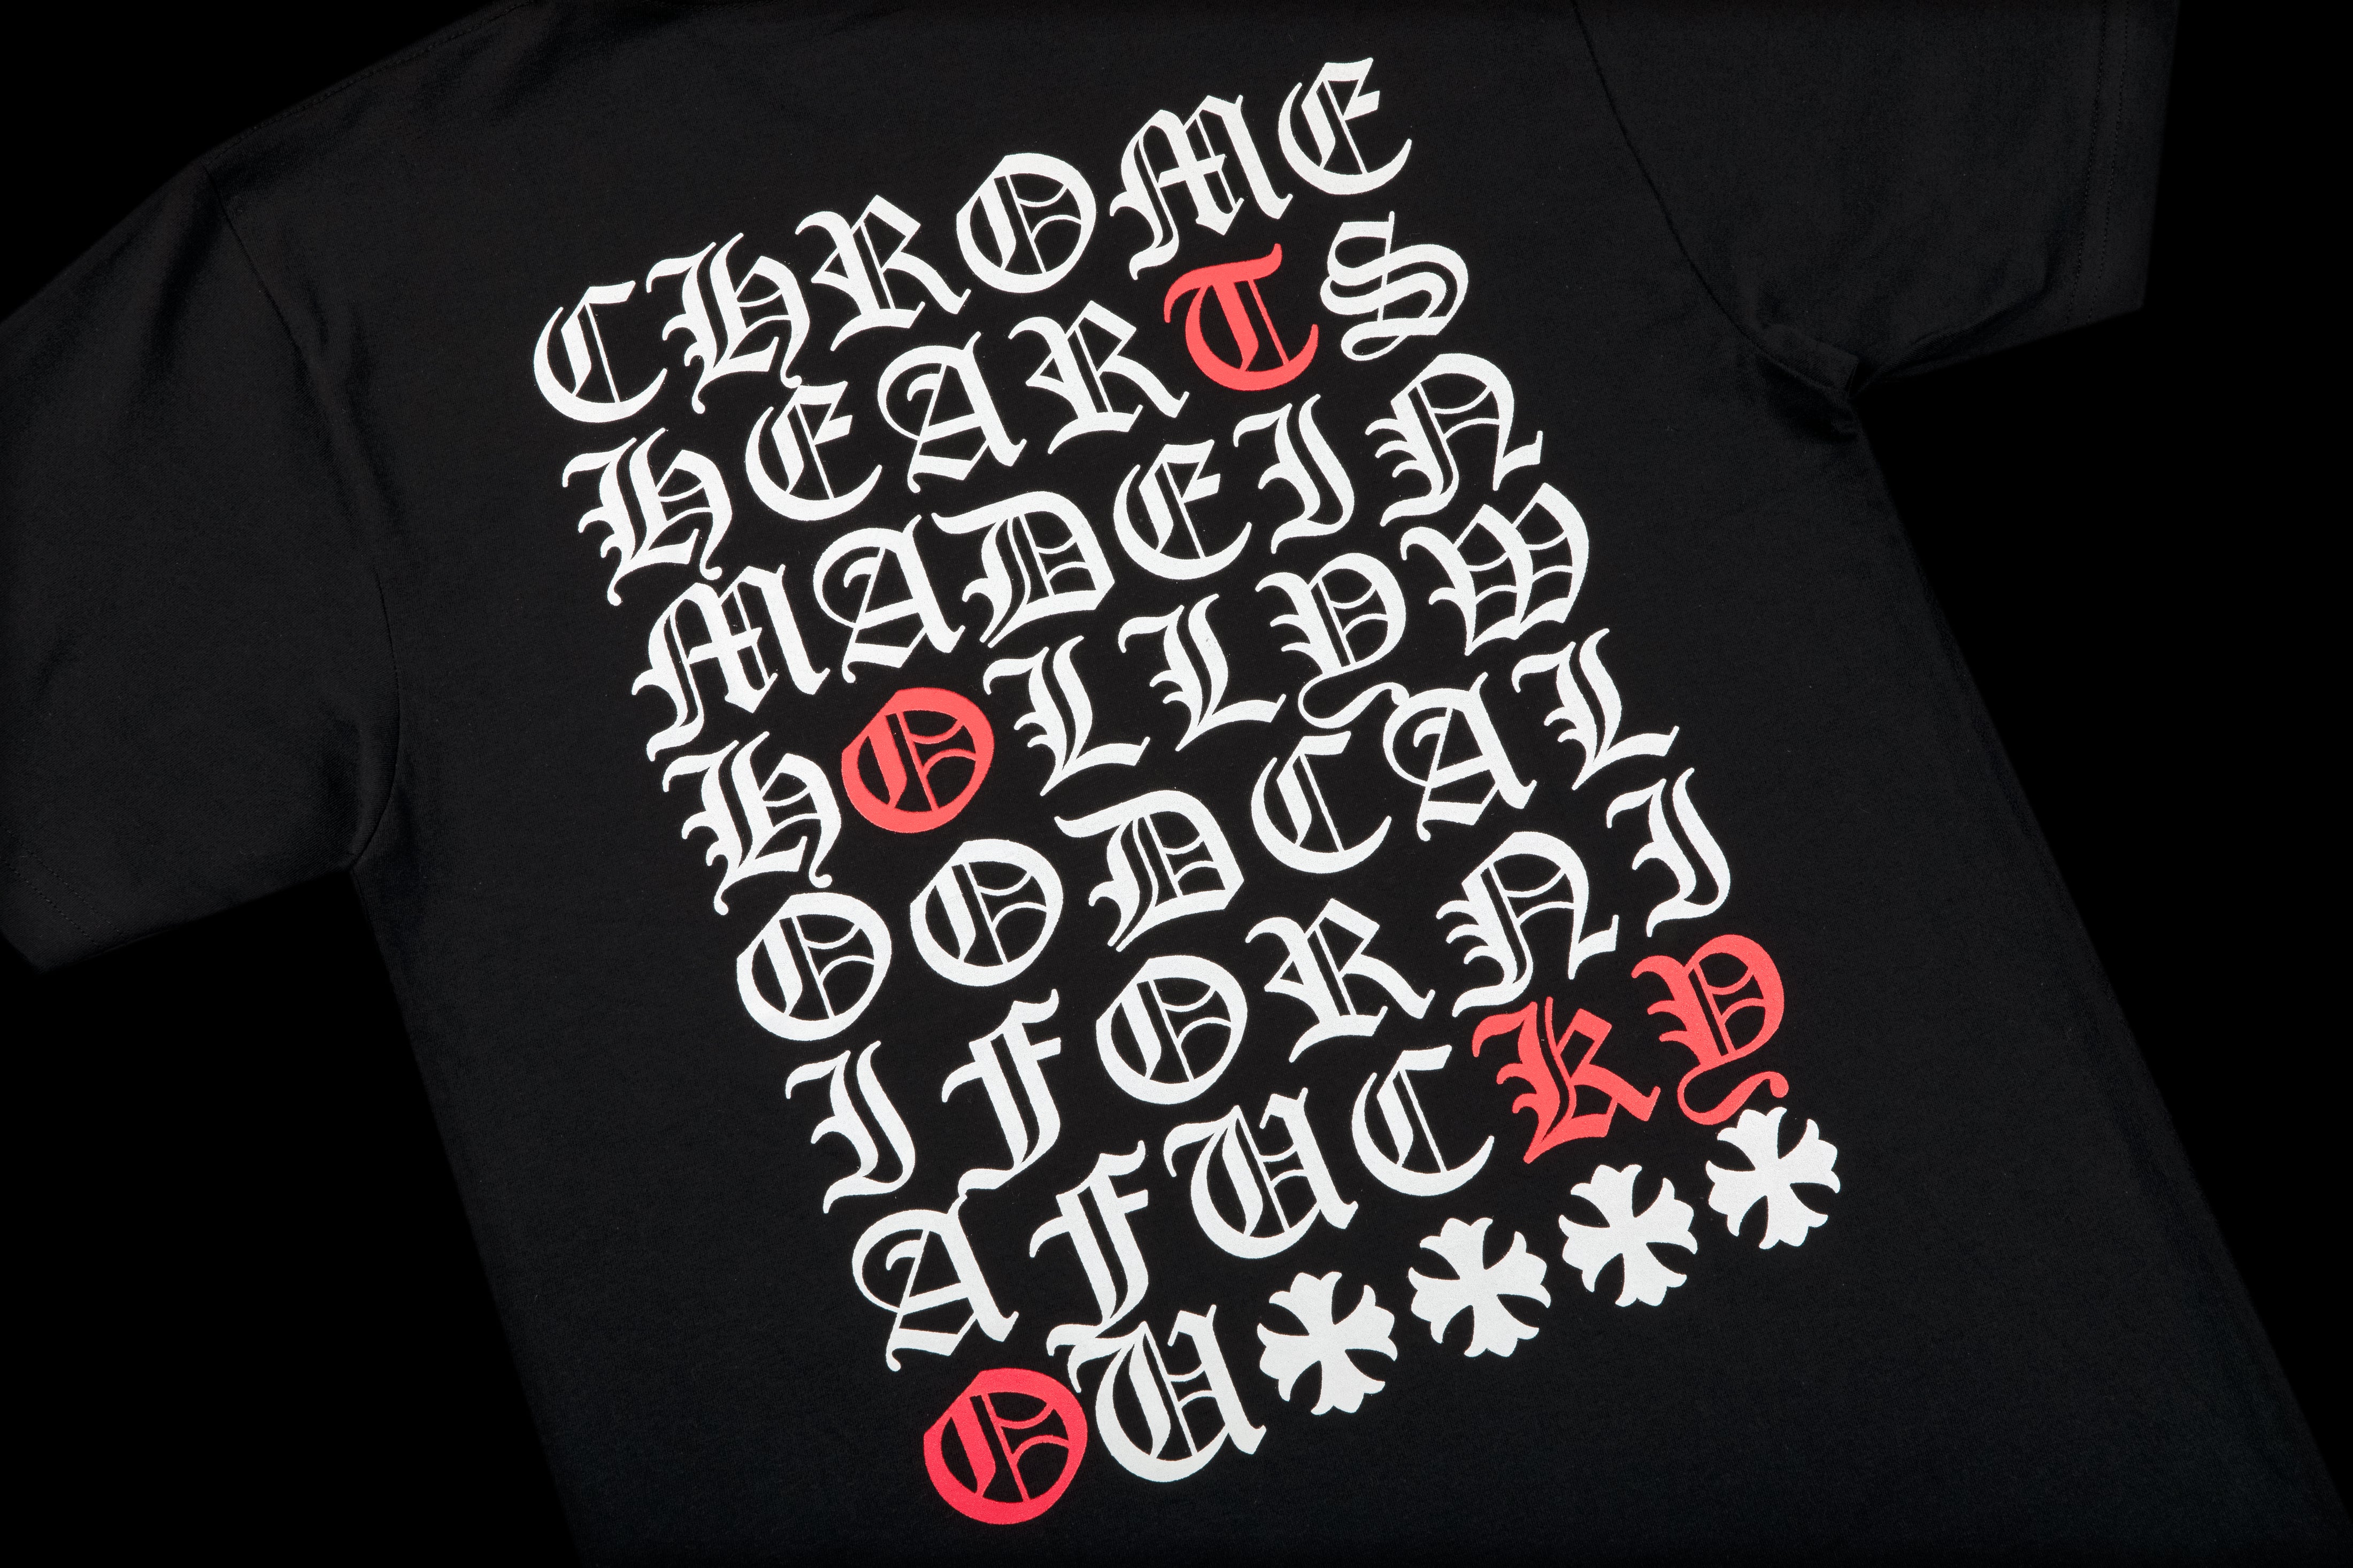 CHROME HEARTS MADE IN HOLLYWOOD (TOKYO) T-SHIRT